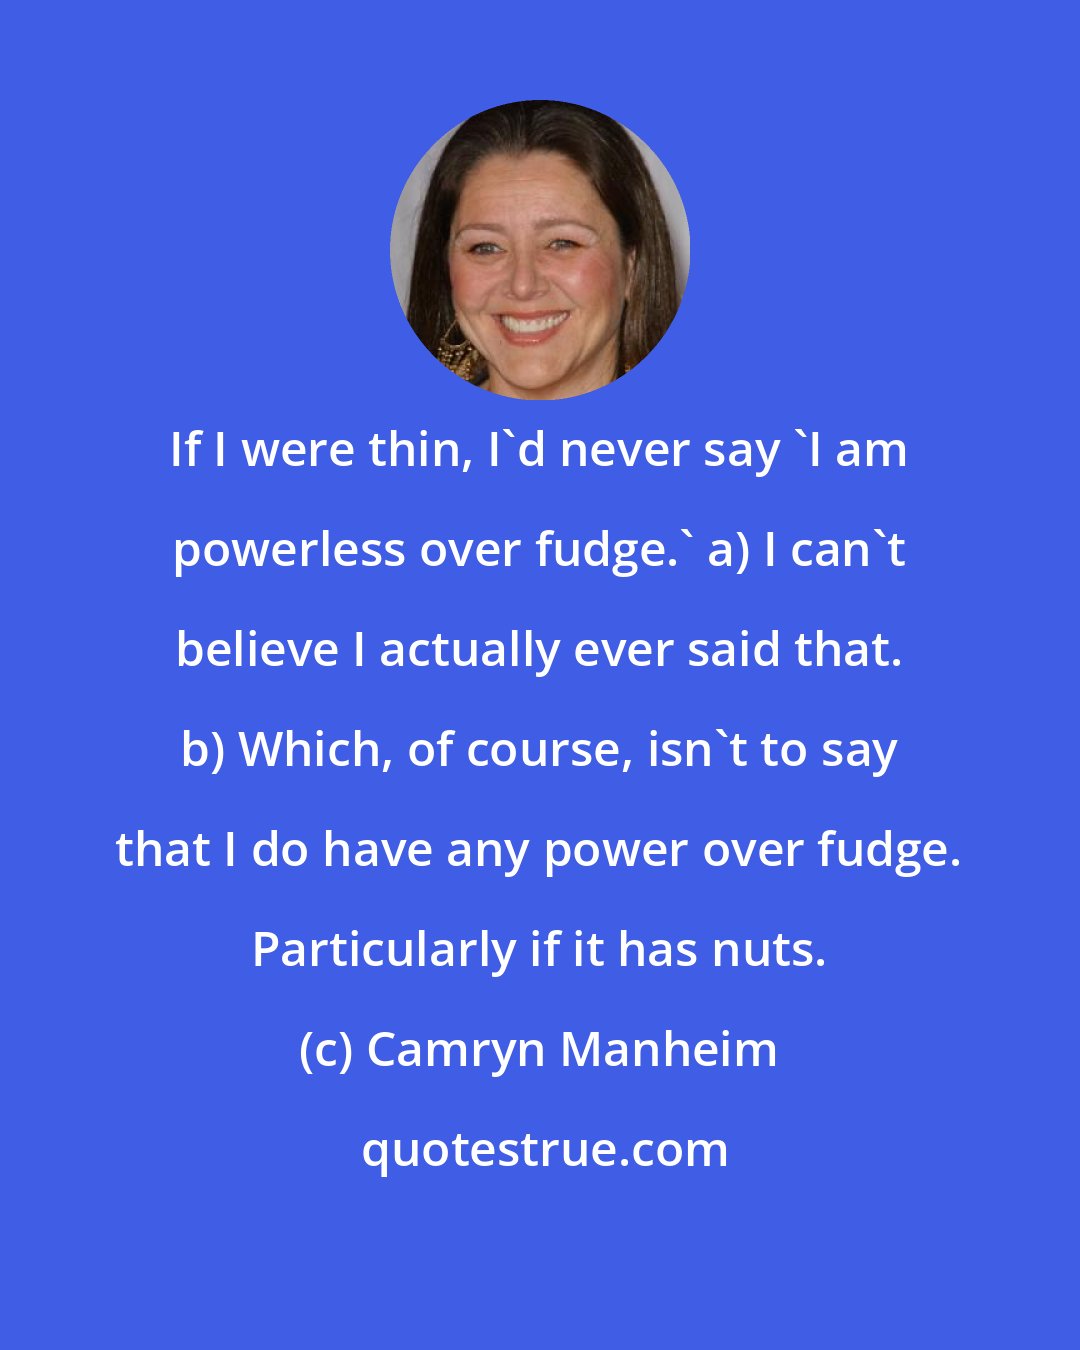 Camryn Manheim: If I were thin, I'd never say 'I am powerless over fudge.' a) I can't believe I actually ever said that. b) Which, of course, isn't to say that I do have any power over fudge. Particularly if it has nuts.